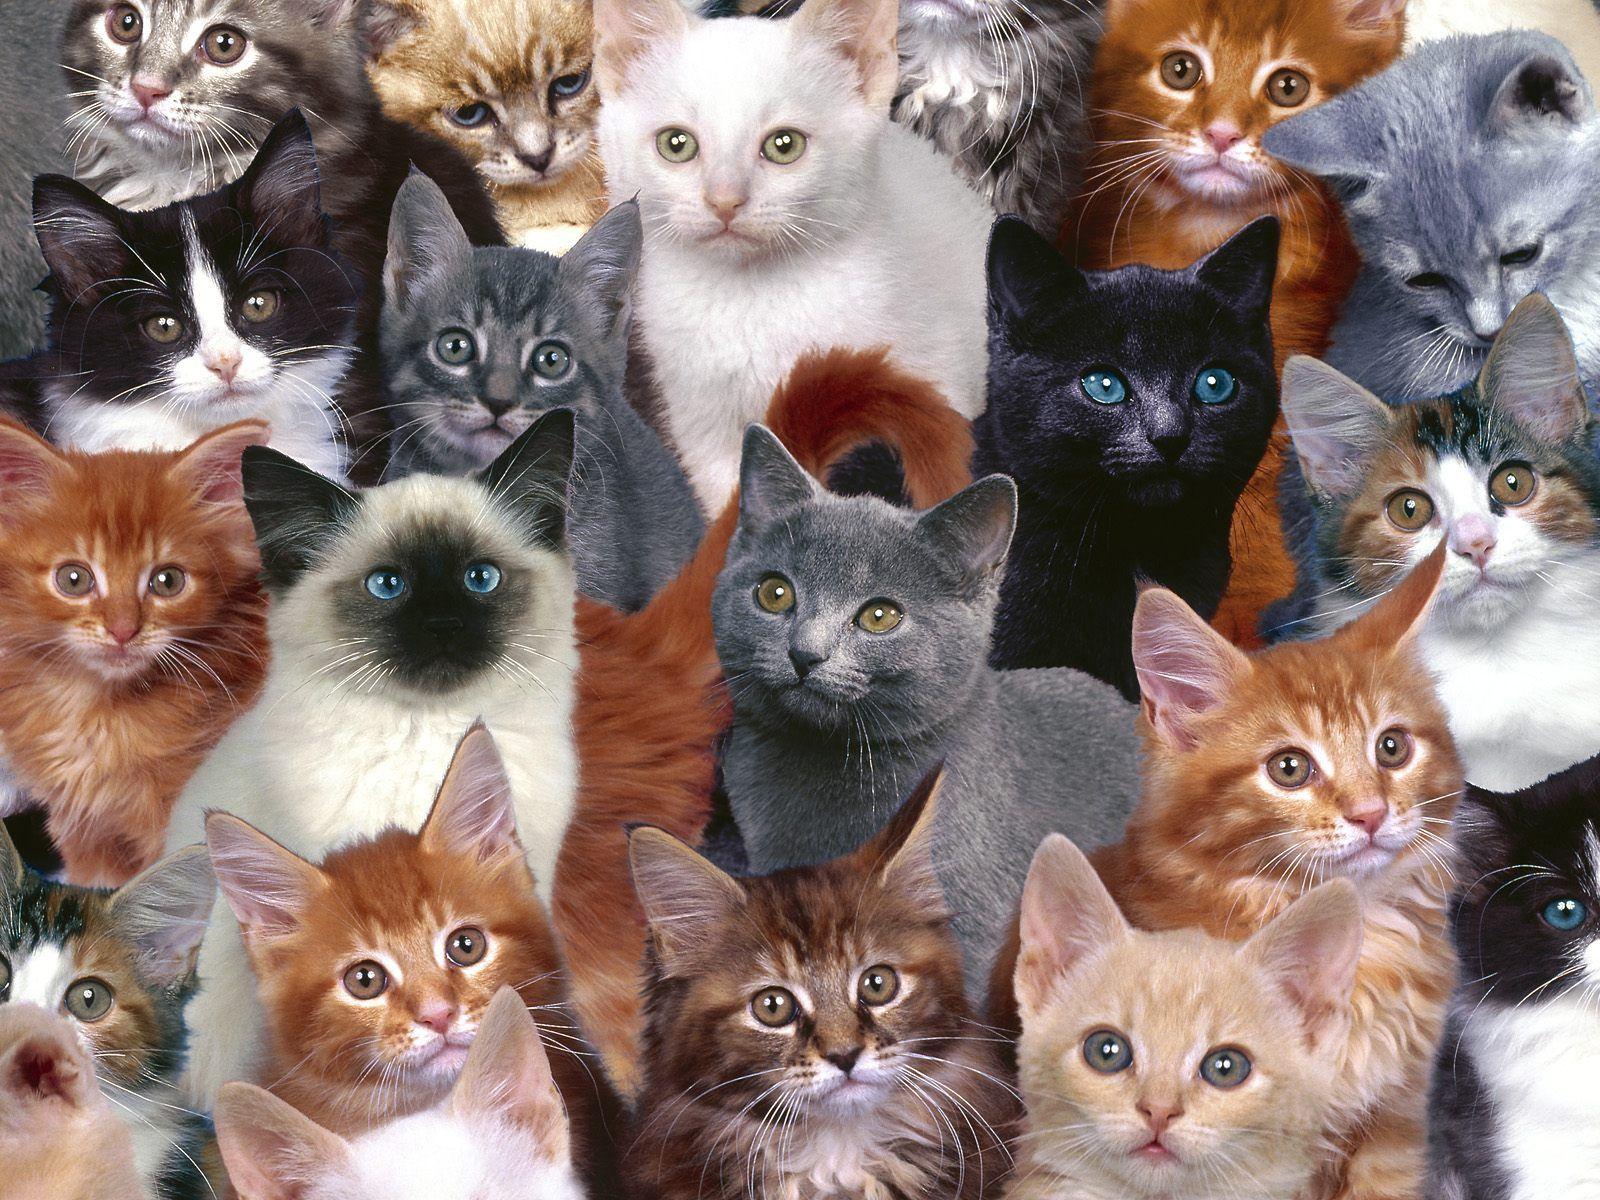 Wallpaper of Cats here available for your device